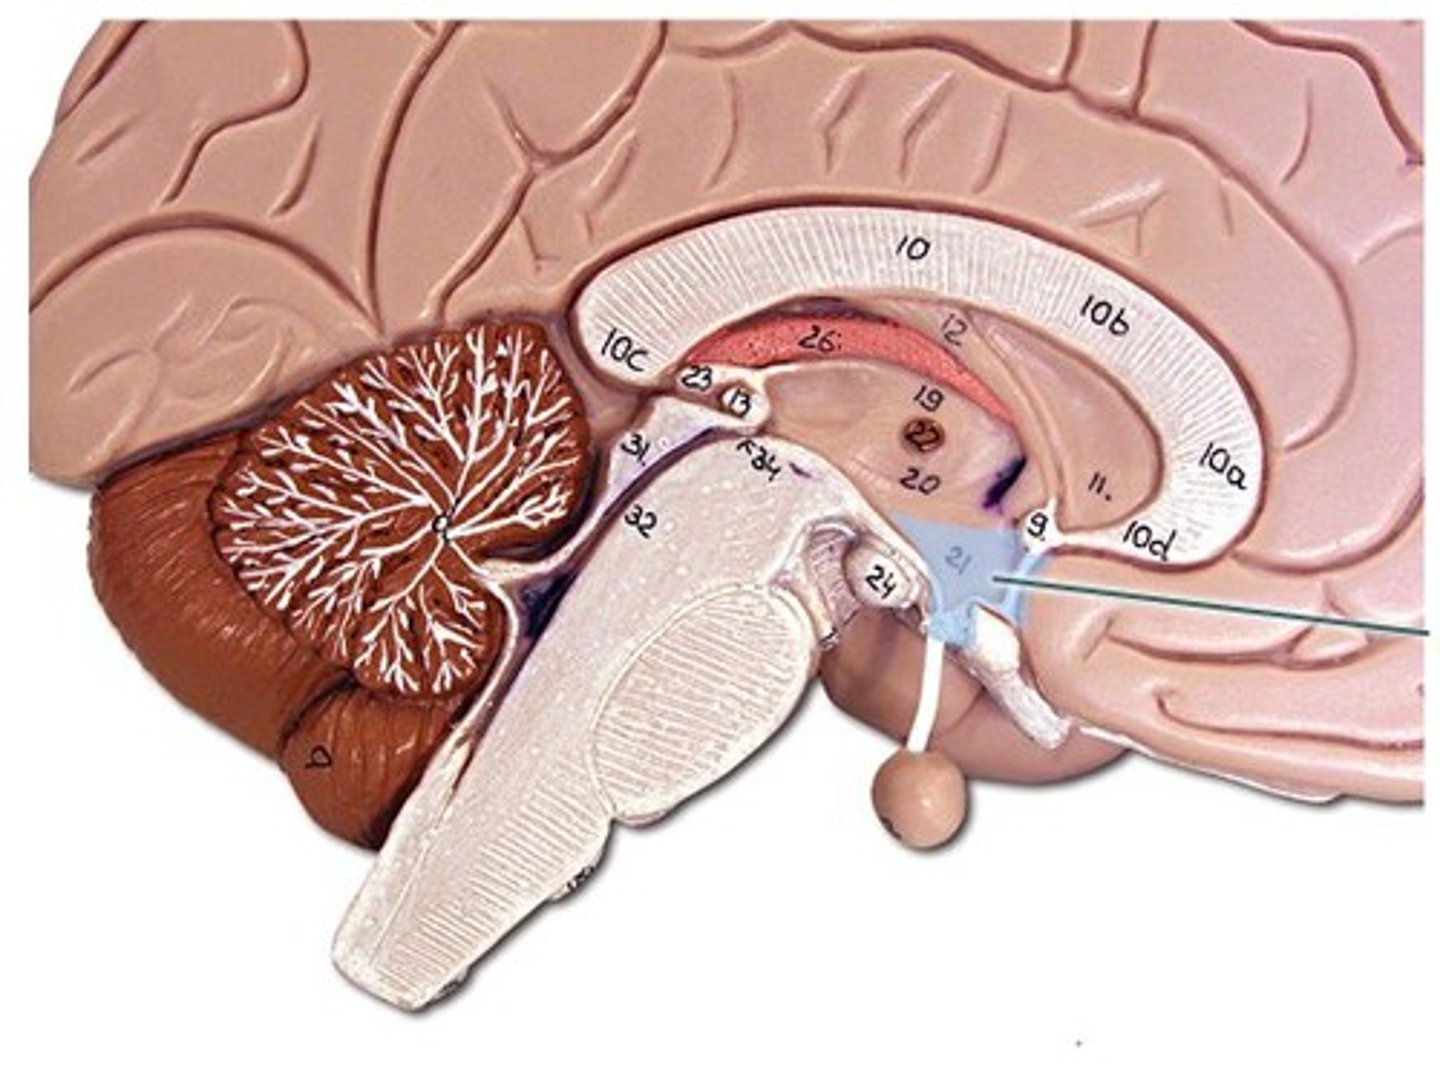 <p>Bilateral structure that surrounds the 3rd ventricle, conveys messages to pituitary gland to control endocrine function, as well as neural projections to different brain regions, maintains homeostasis (eating, drinking, reproduction, defense, etc)</p>